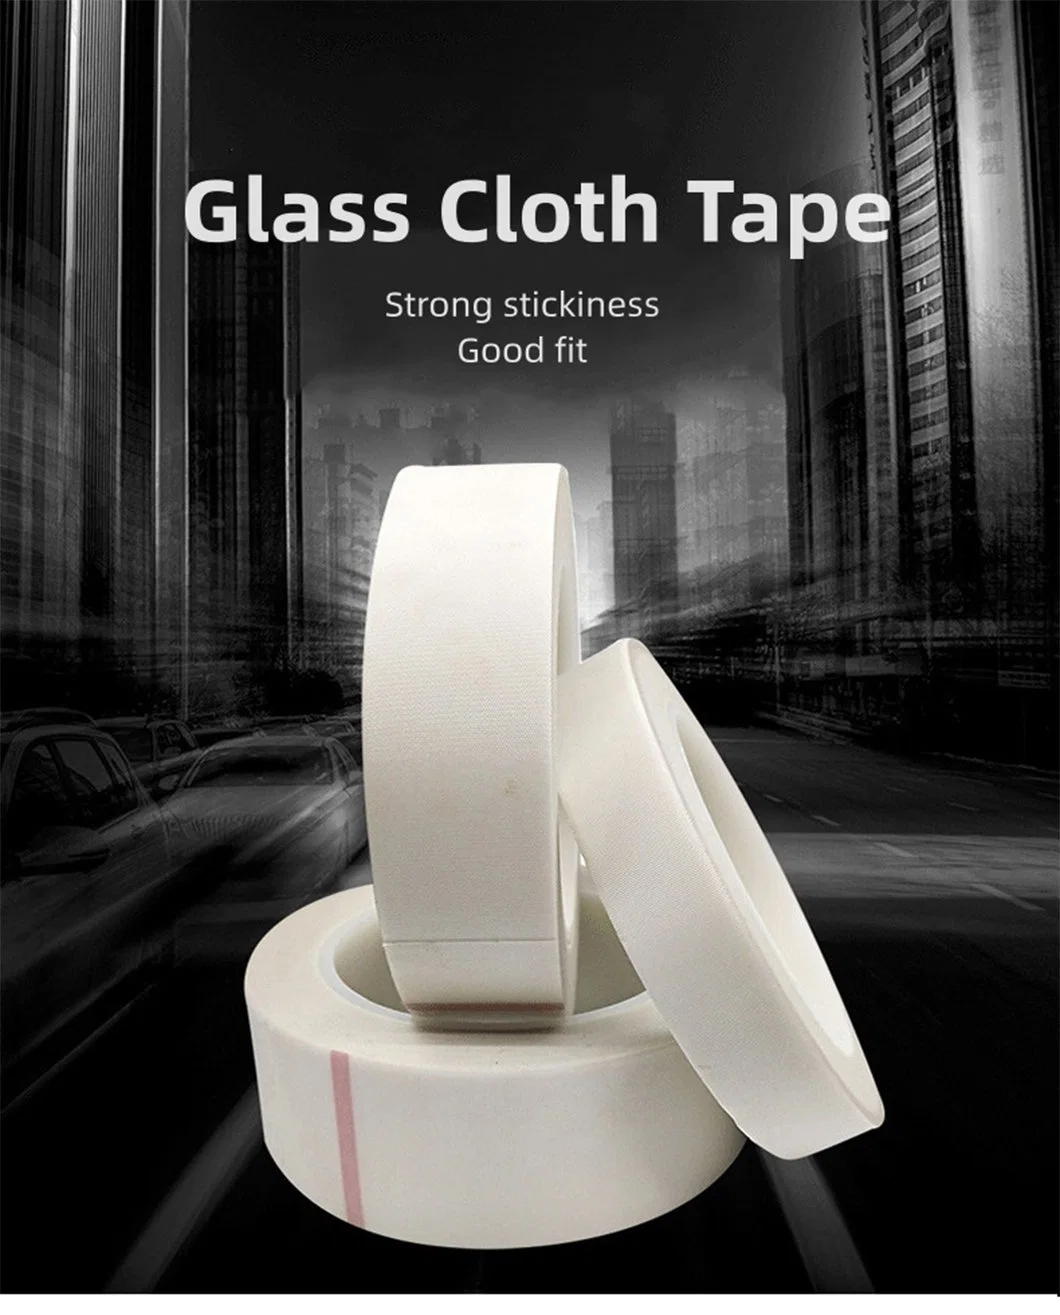 Heavy Duty 3m 893 897 898 8915 8934 Fiber Shipping Clear Self Adhesive Strapping Reinforced Fiberglass Filament Tape